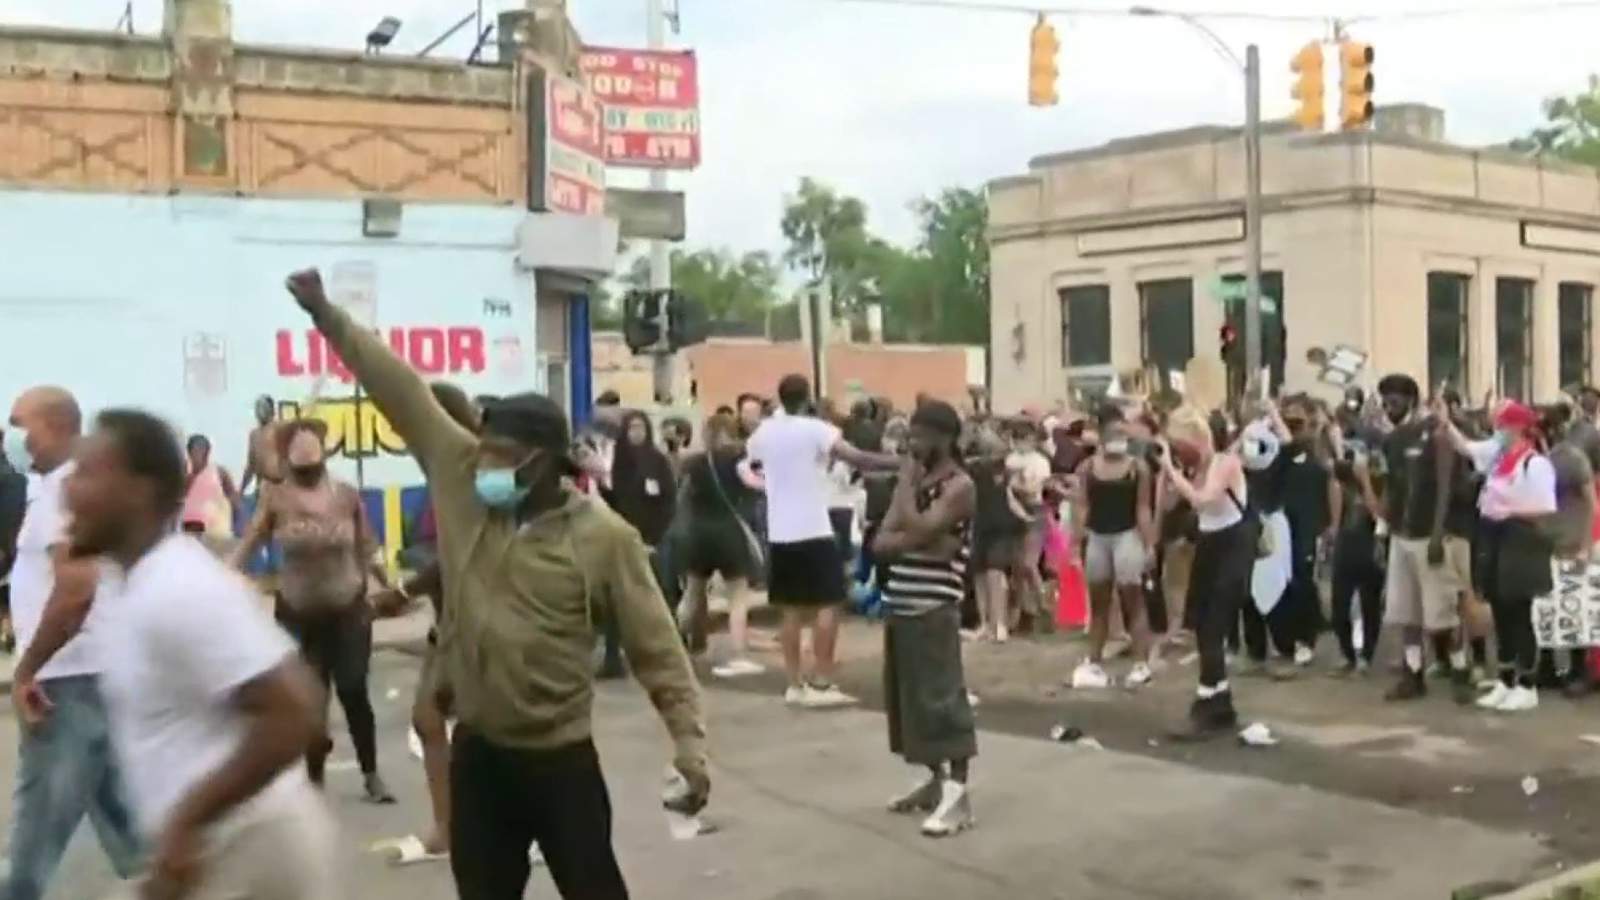 8 arrests made in Friday protest over shooting death of 20-year-old